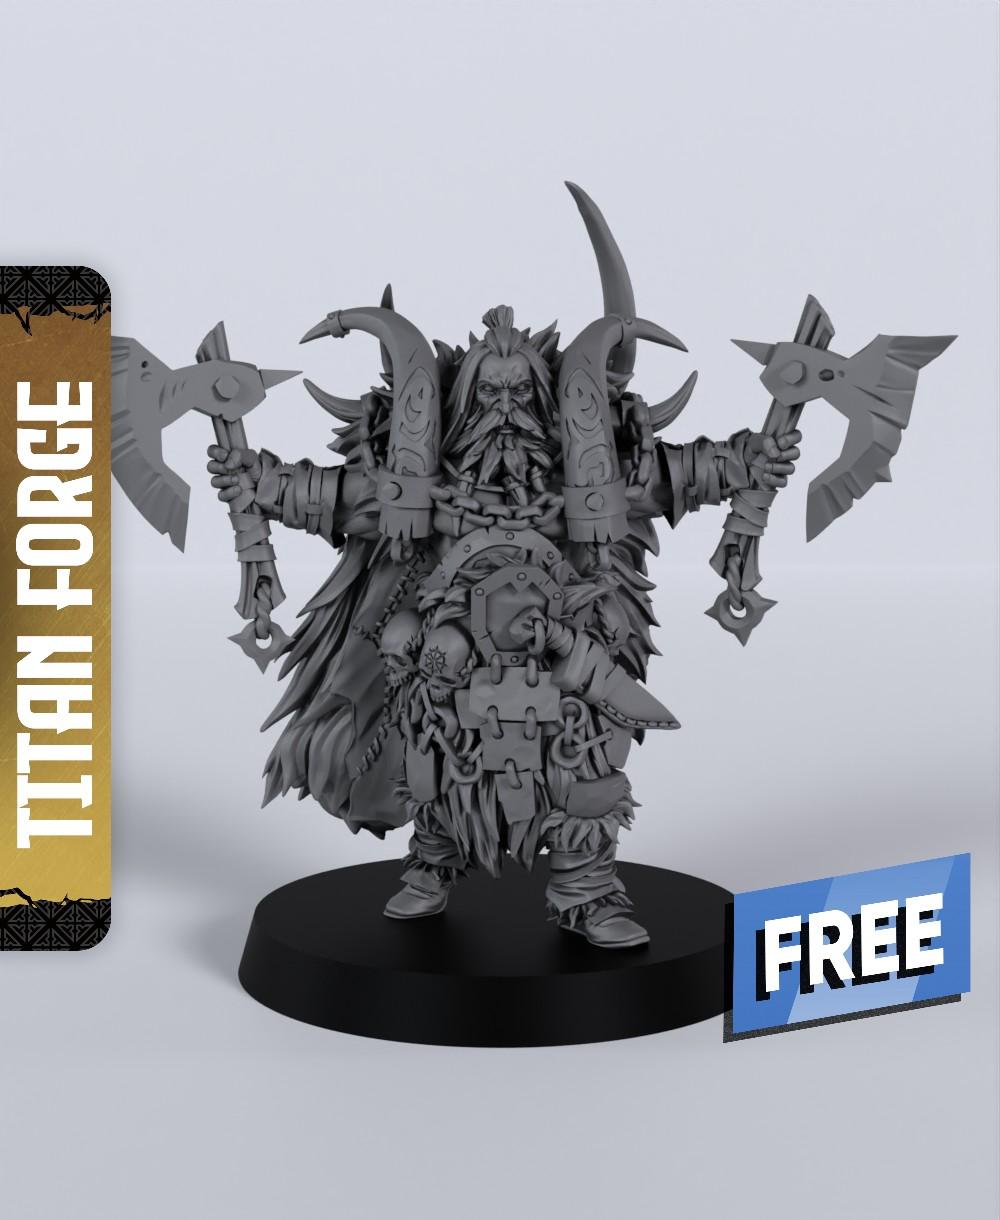 Warchief - With Free Dragon Warhammer - 5e DnD Inspired for RPG and Wargamers 3d model